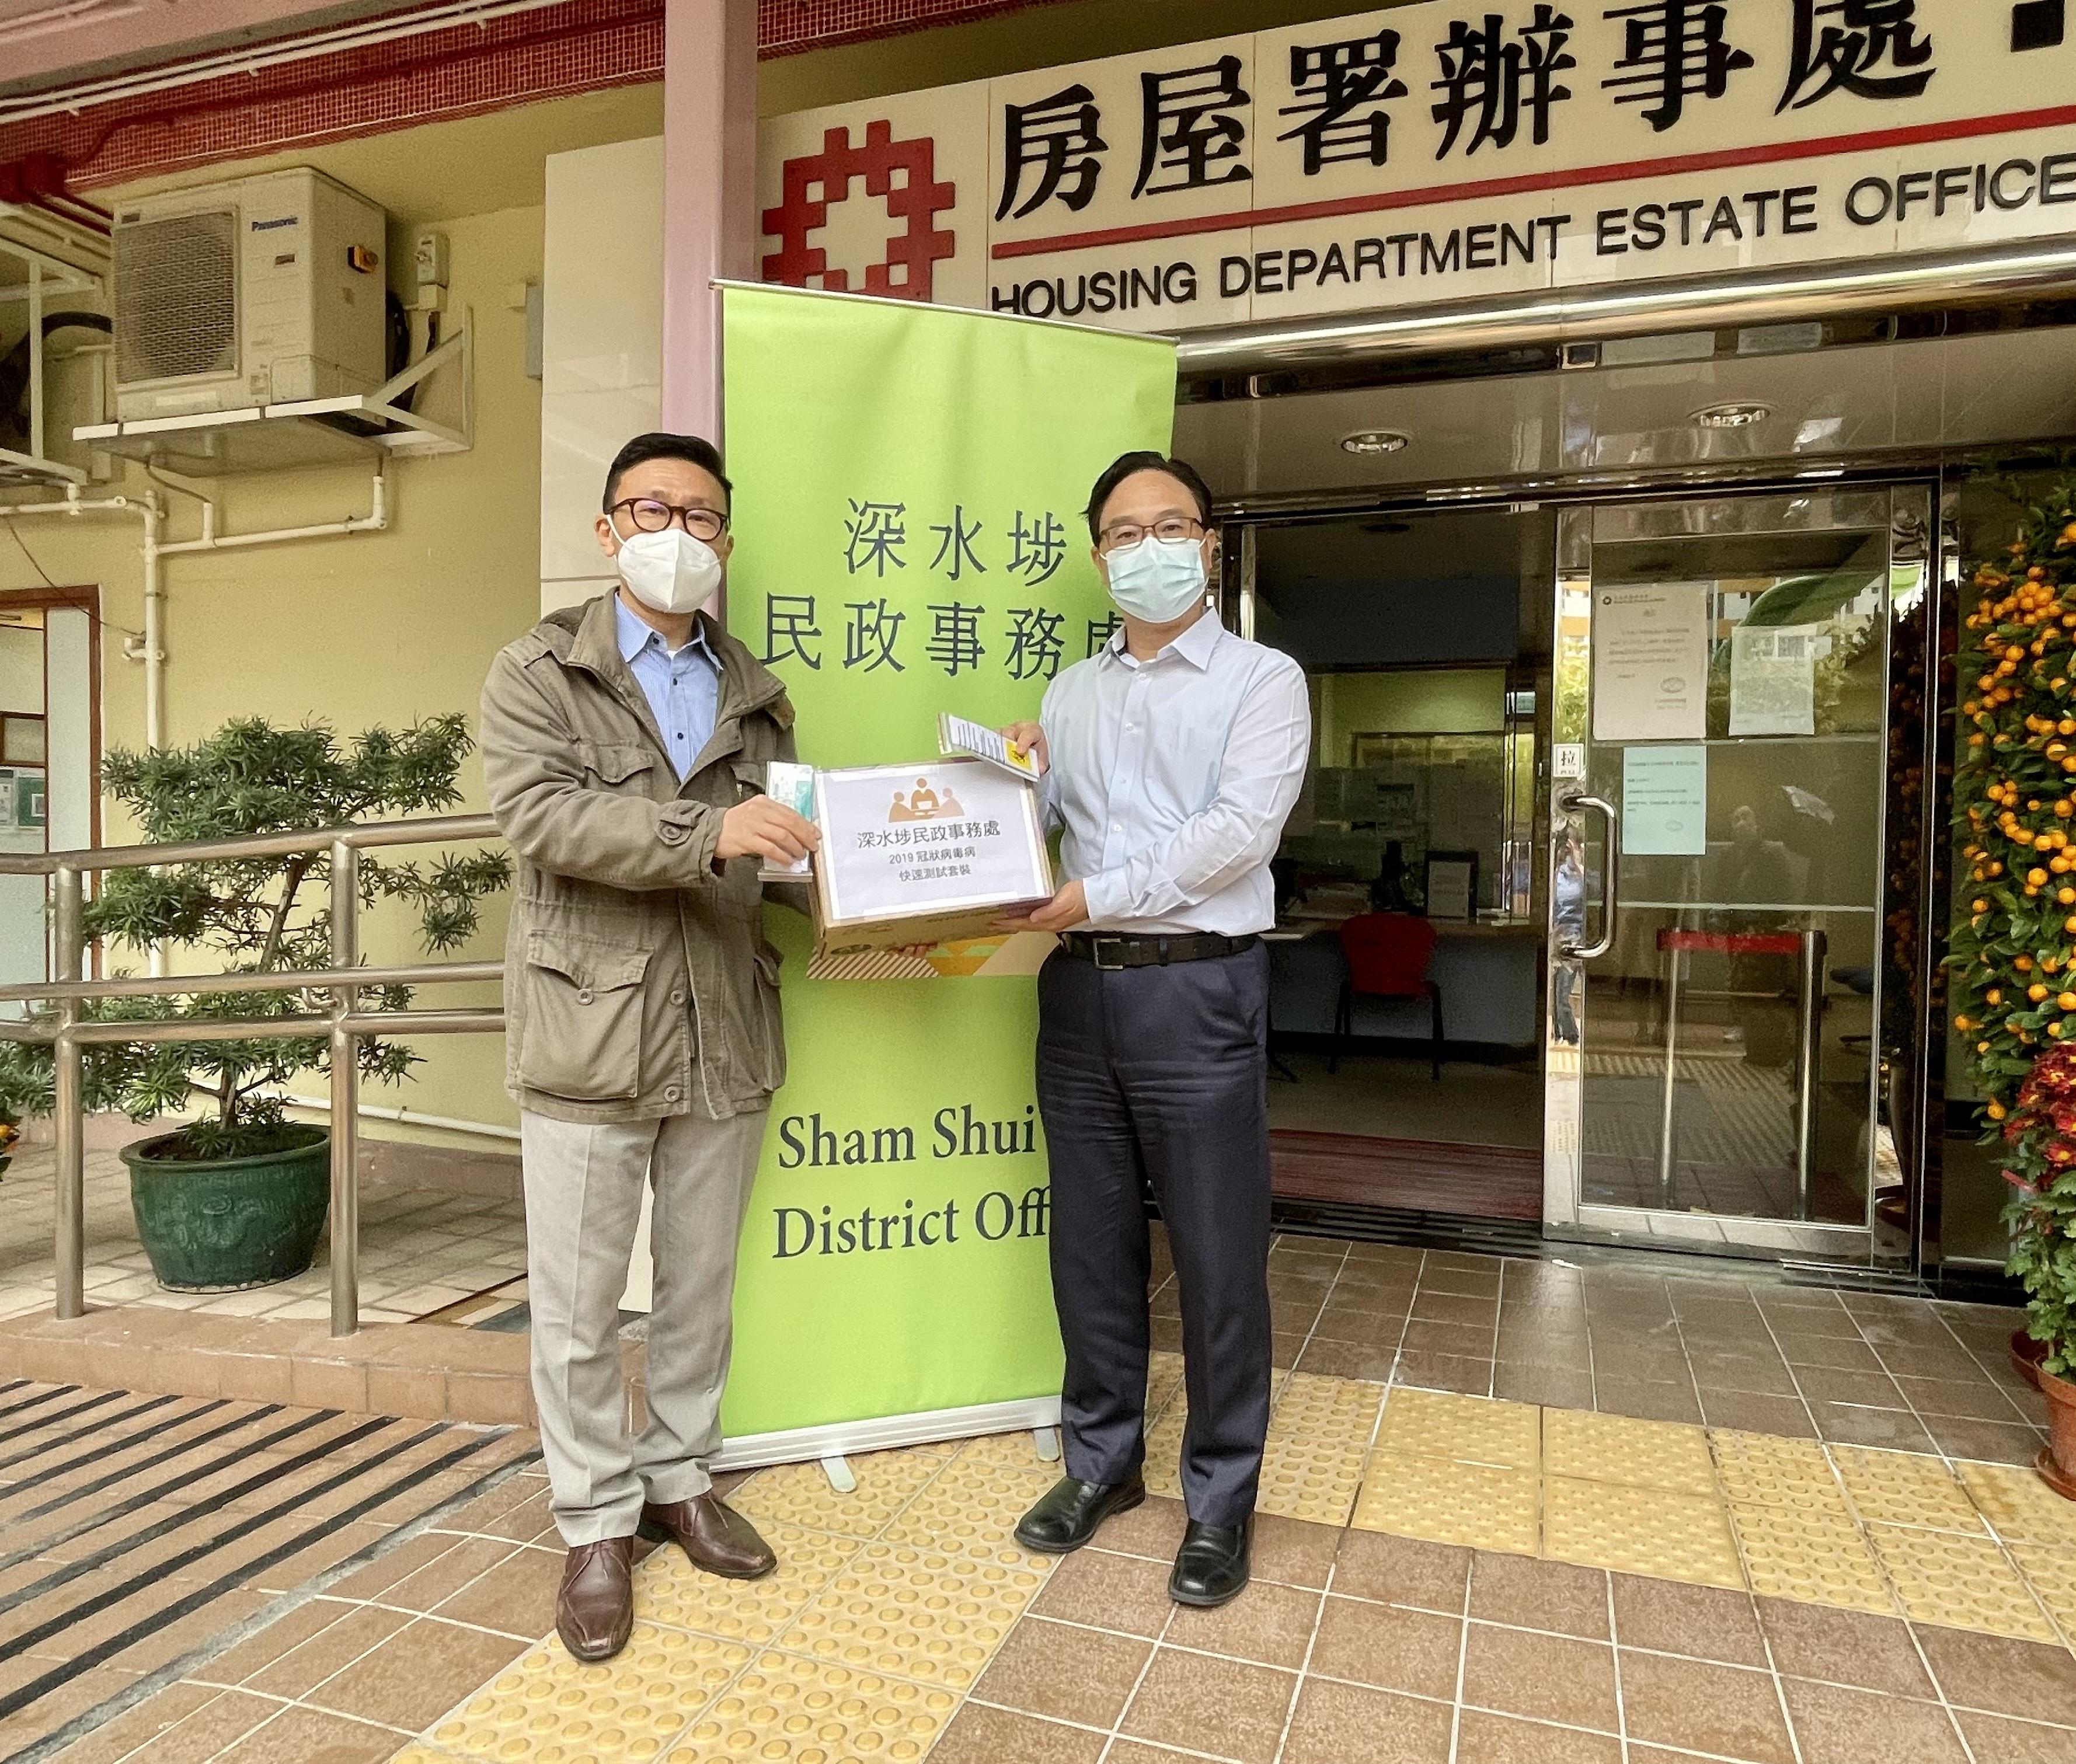 The Sham Shui Po District Office today (February 17) distributed rapid test kits to cleansing workers and property management staff working in Shek Kip Mei Estate for voluntary testing through the Housing Department and the property management company.